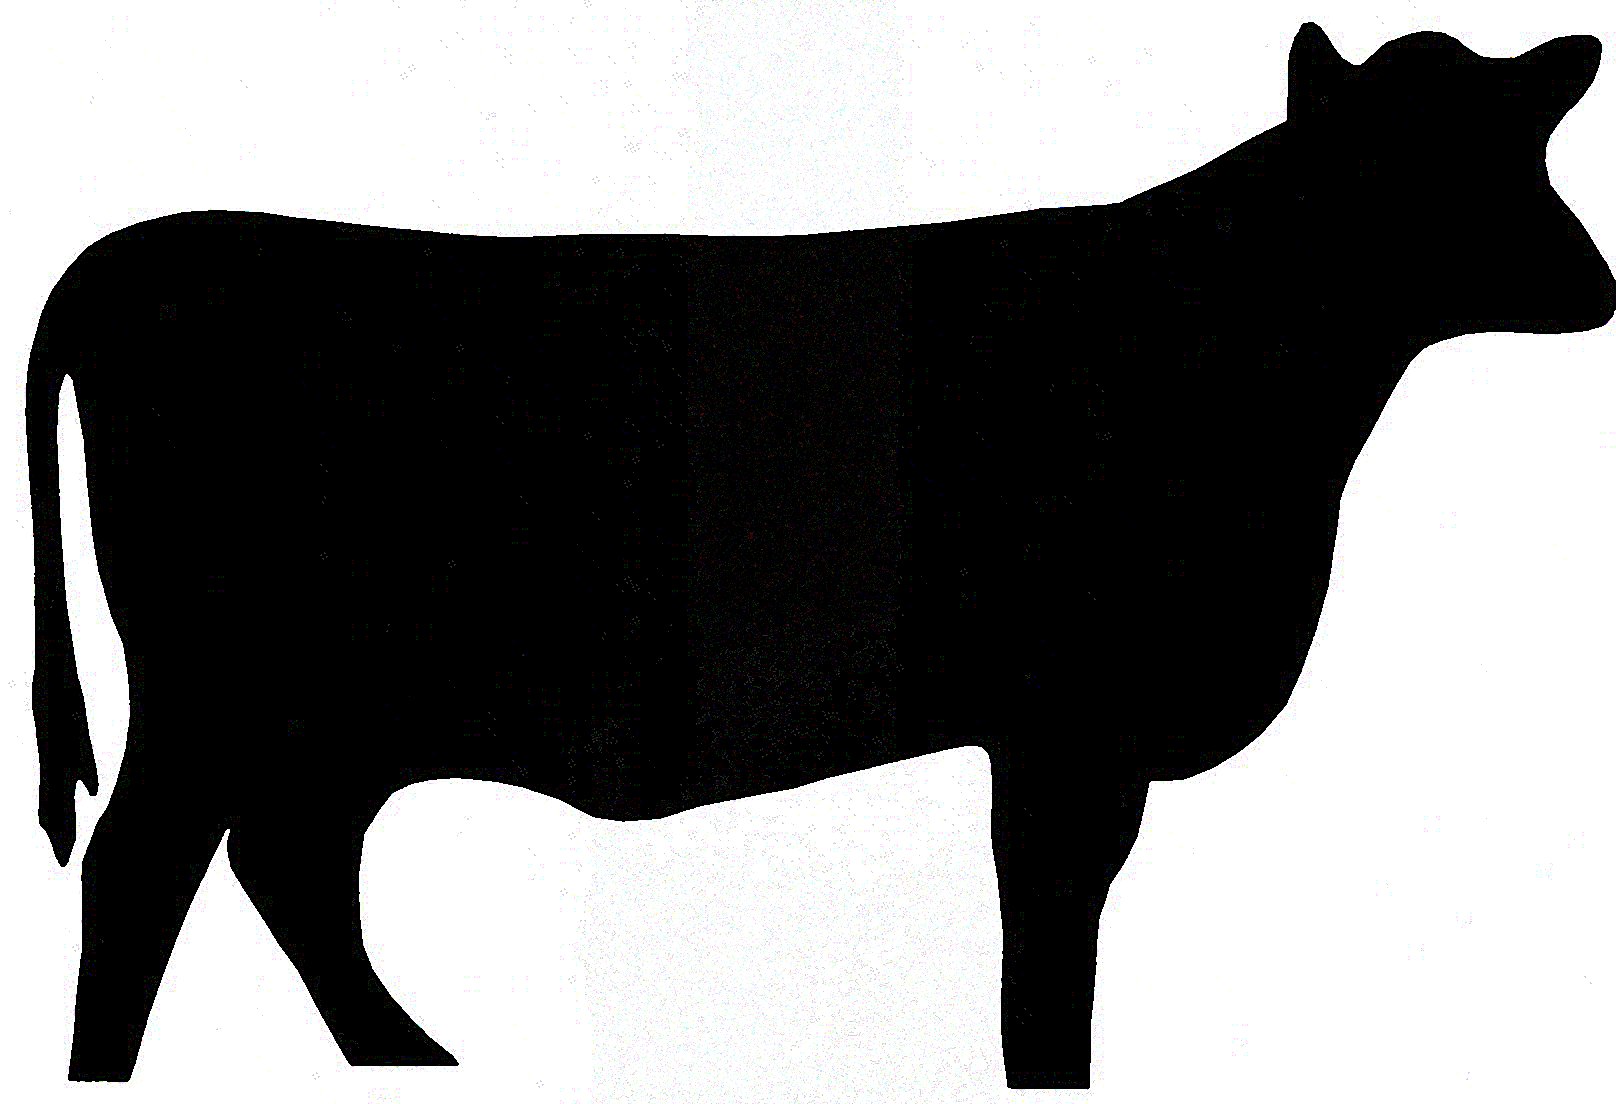 4-h Steer Silhouette Clipart